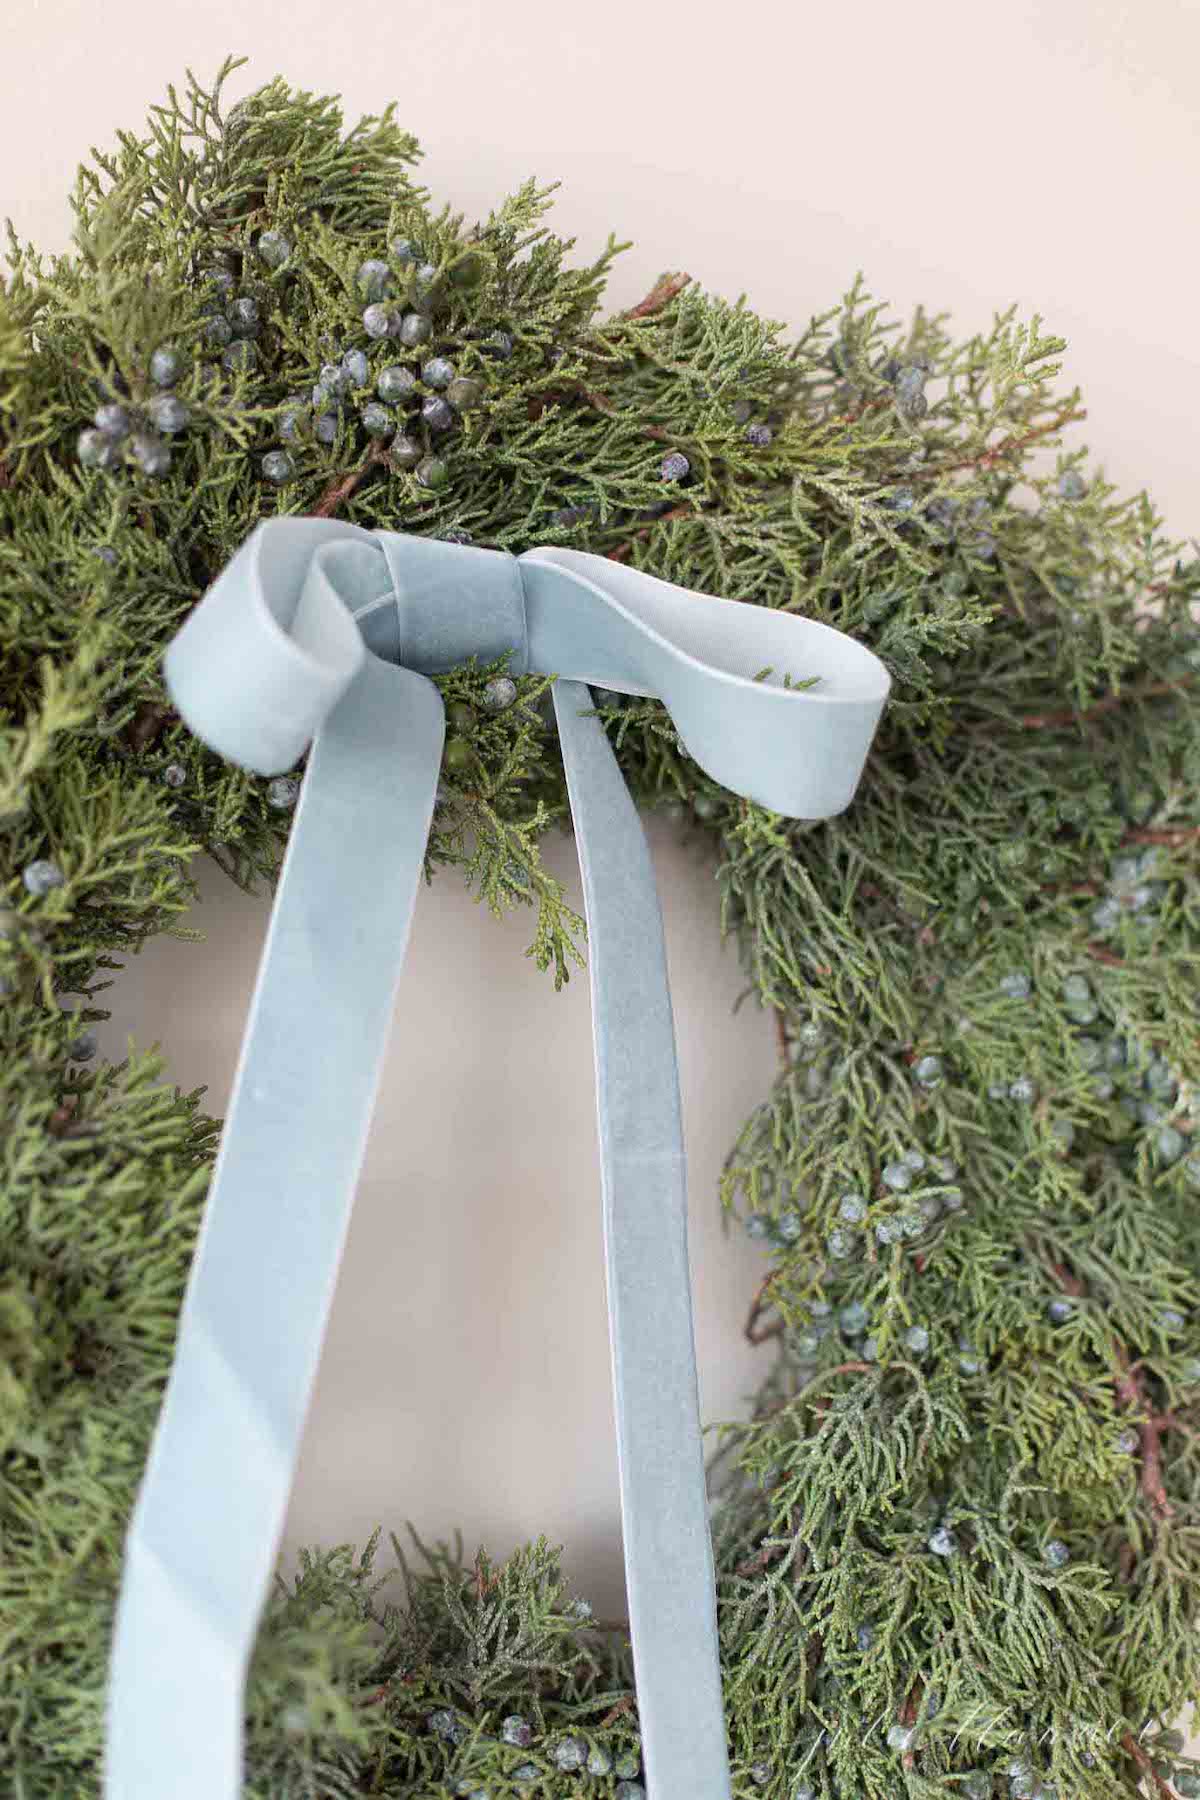 A beautiful wreath with a blue ribbon, perfect for holiday homes and adding festive blue Christmas decorations.